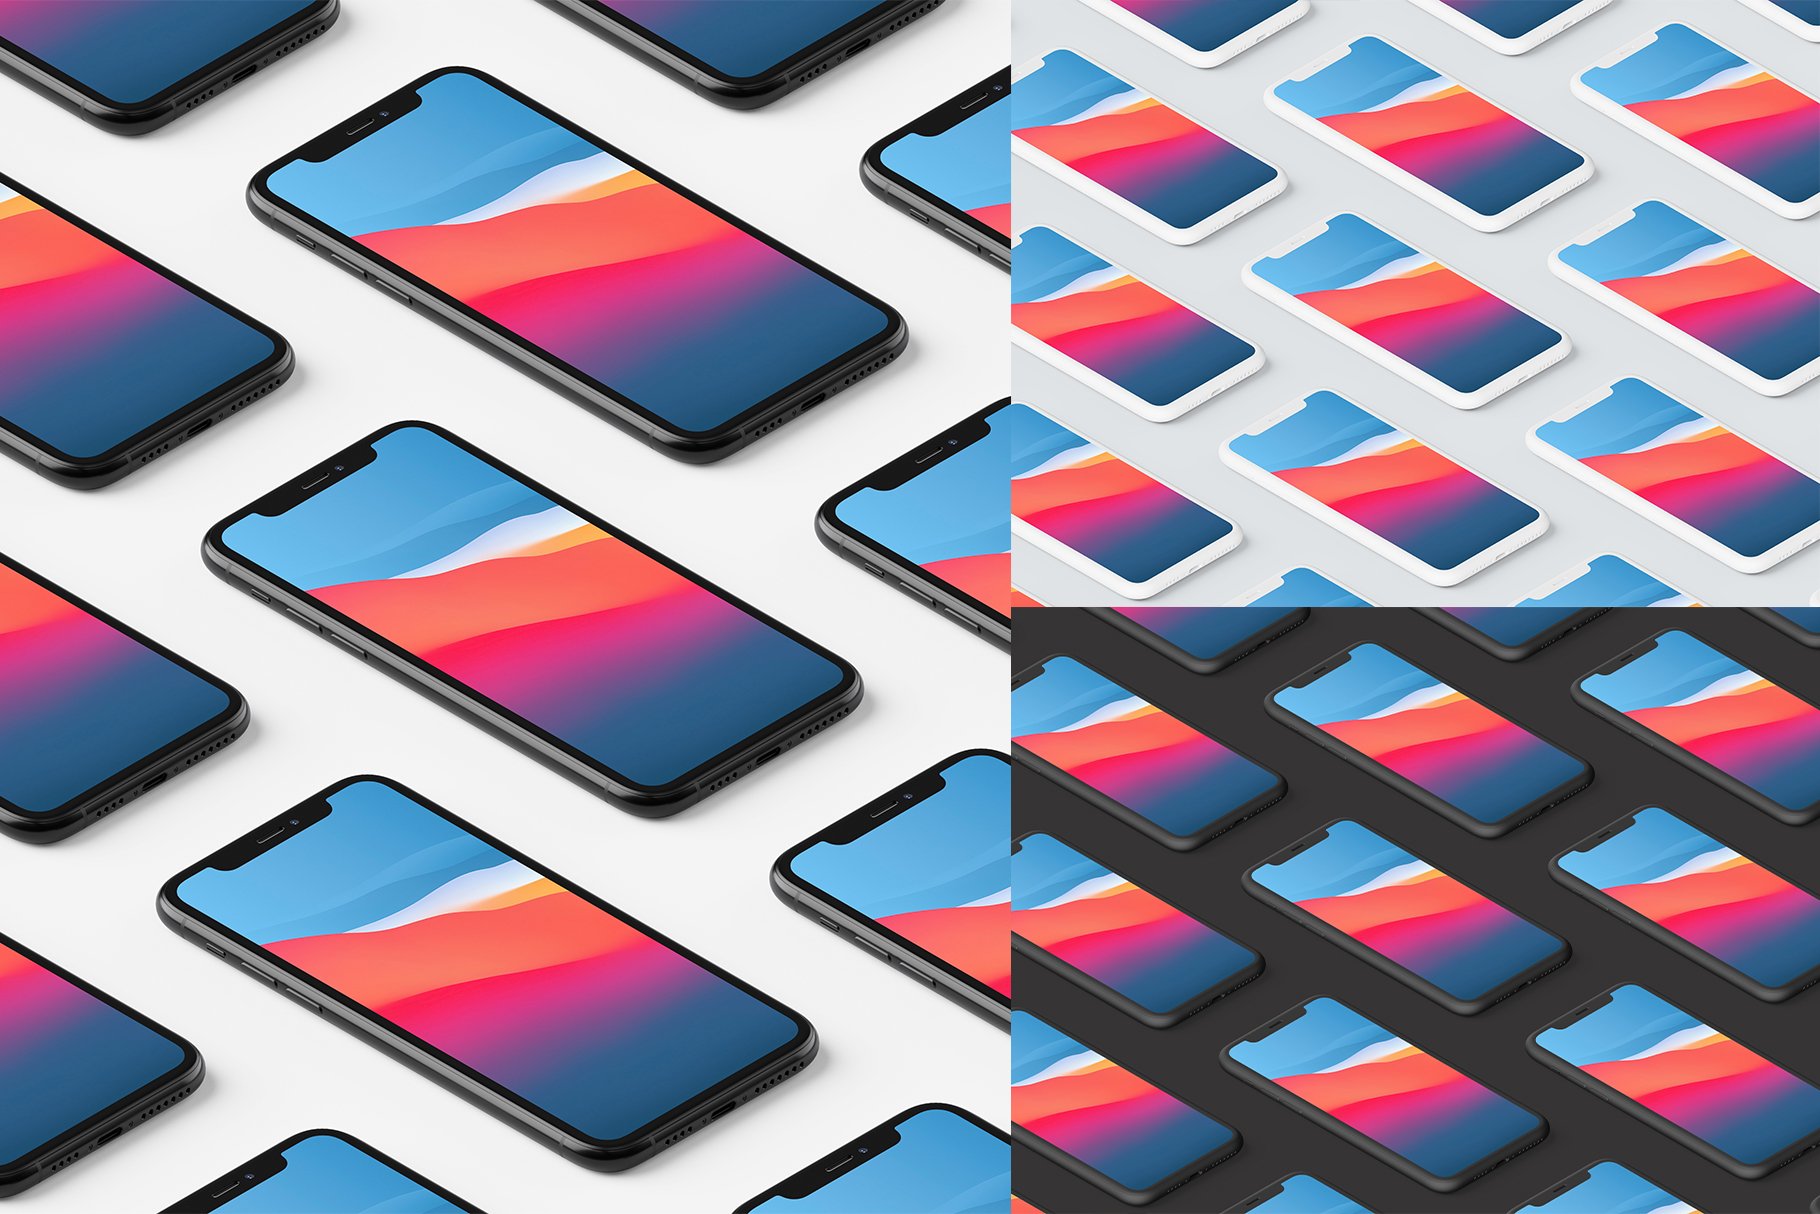 iphone 11 pro mockup pack by anthony boyd graphics 28s9v229 650